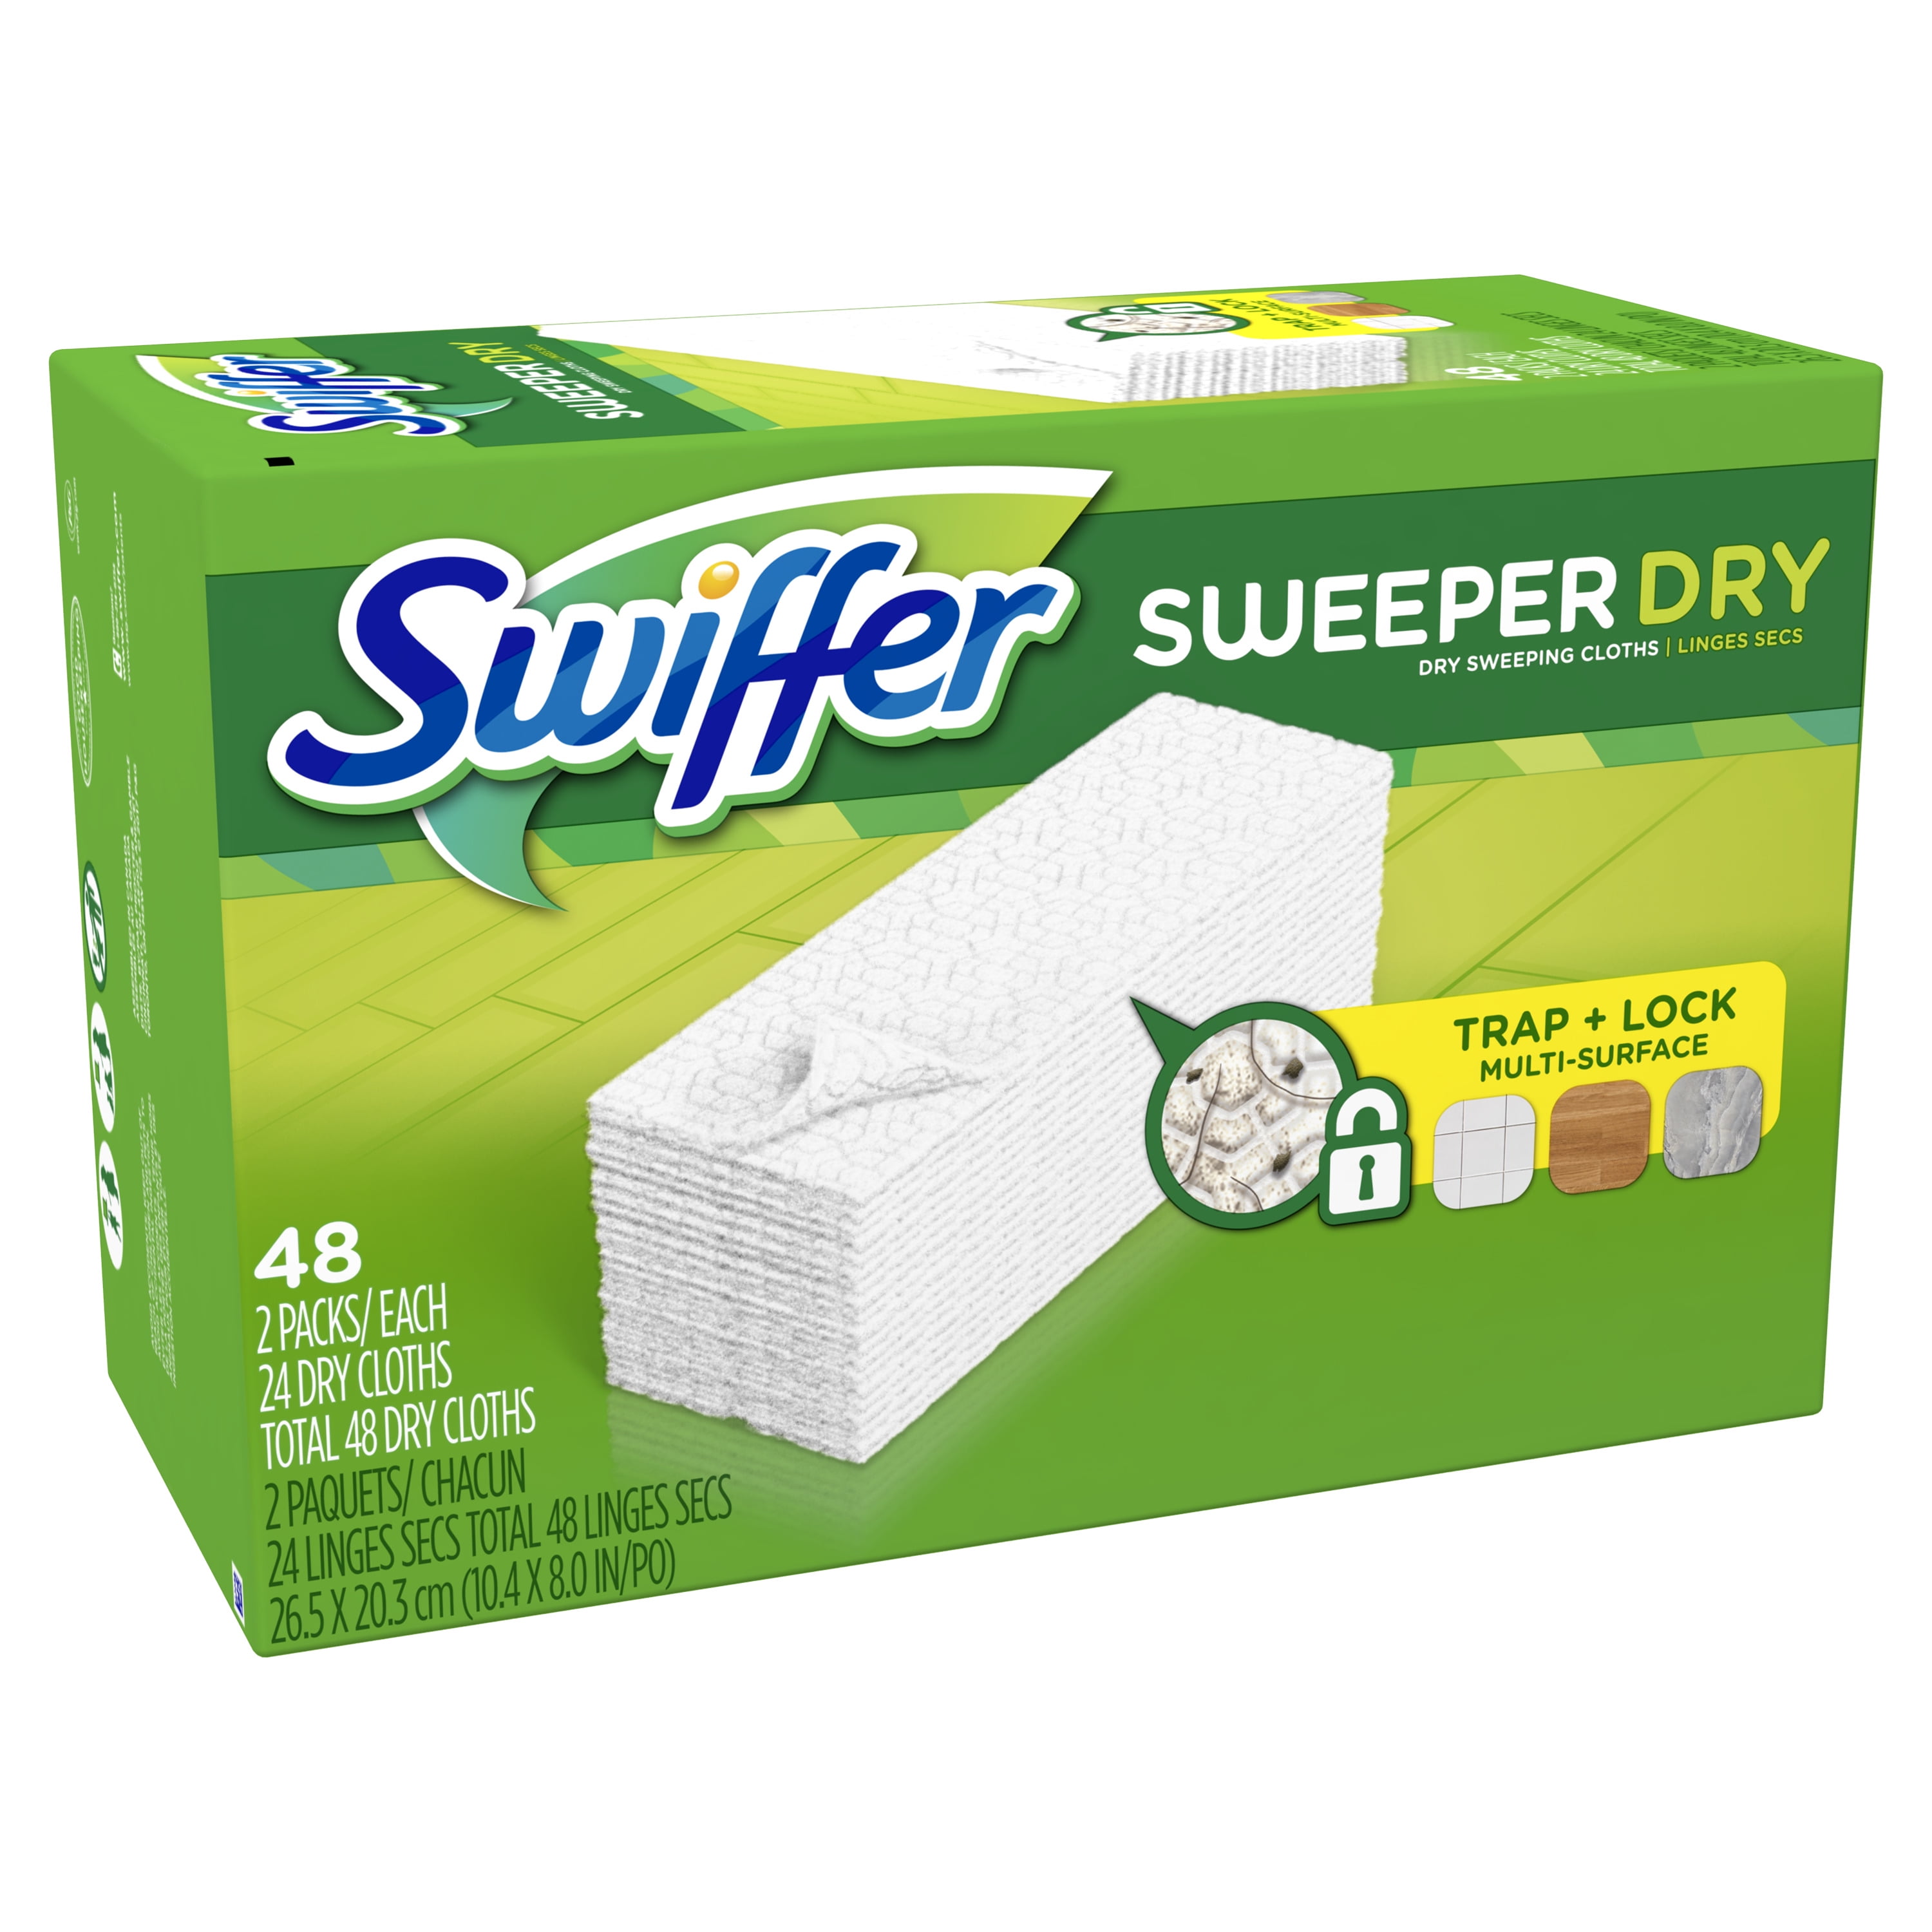 Swiffer Sweeper Dry Sweeping Cloths Unscented Refills 32 count Trap and Lock NEW 